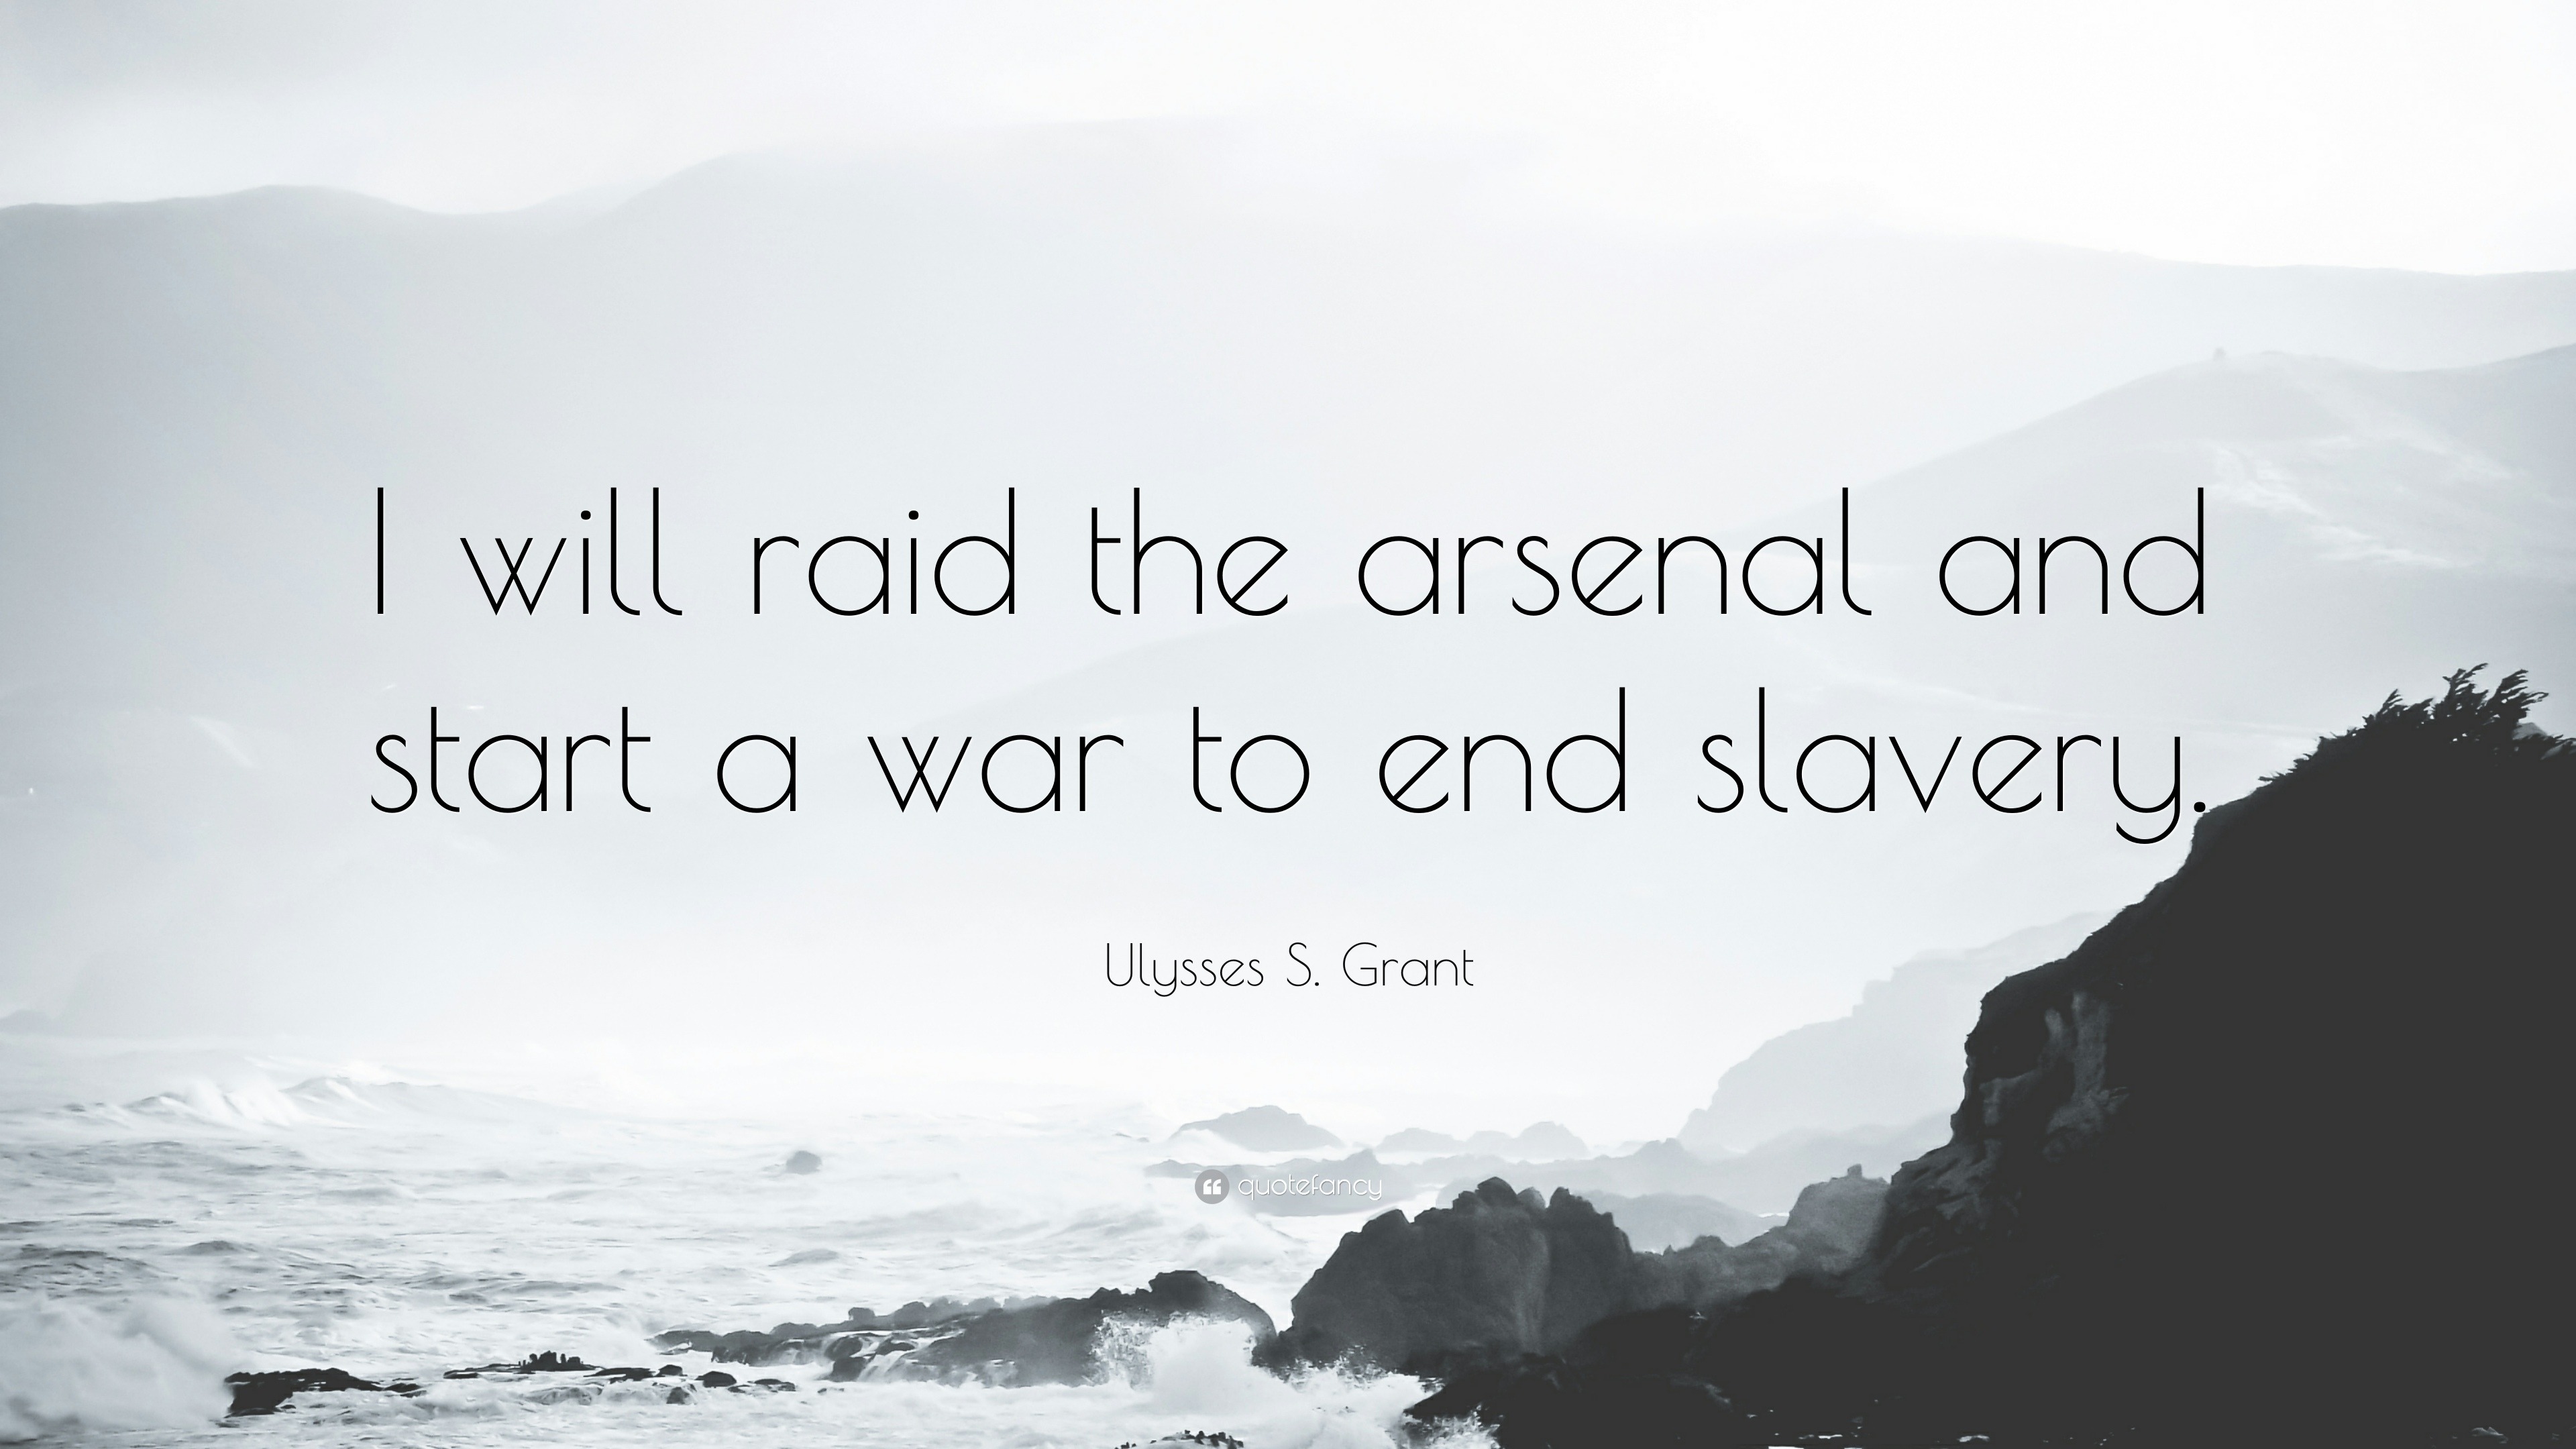 ulysses s grant quotes